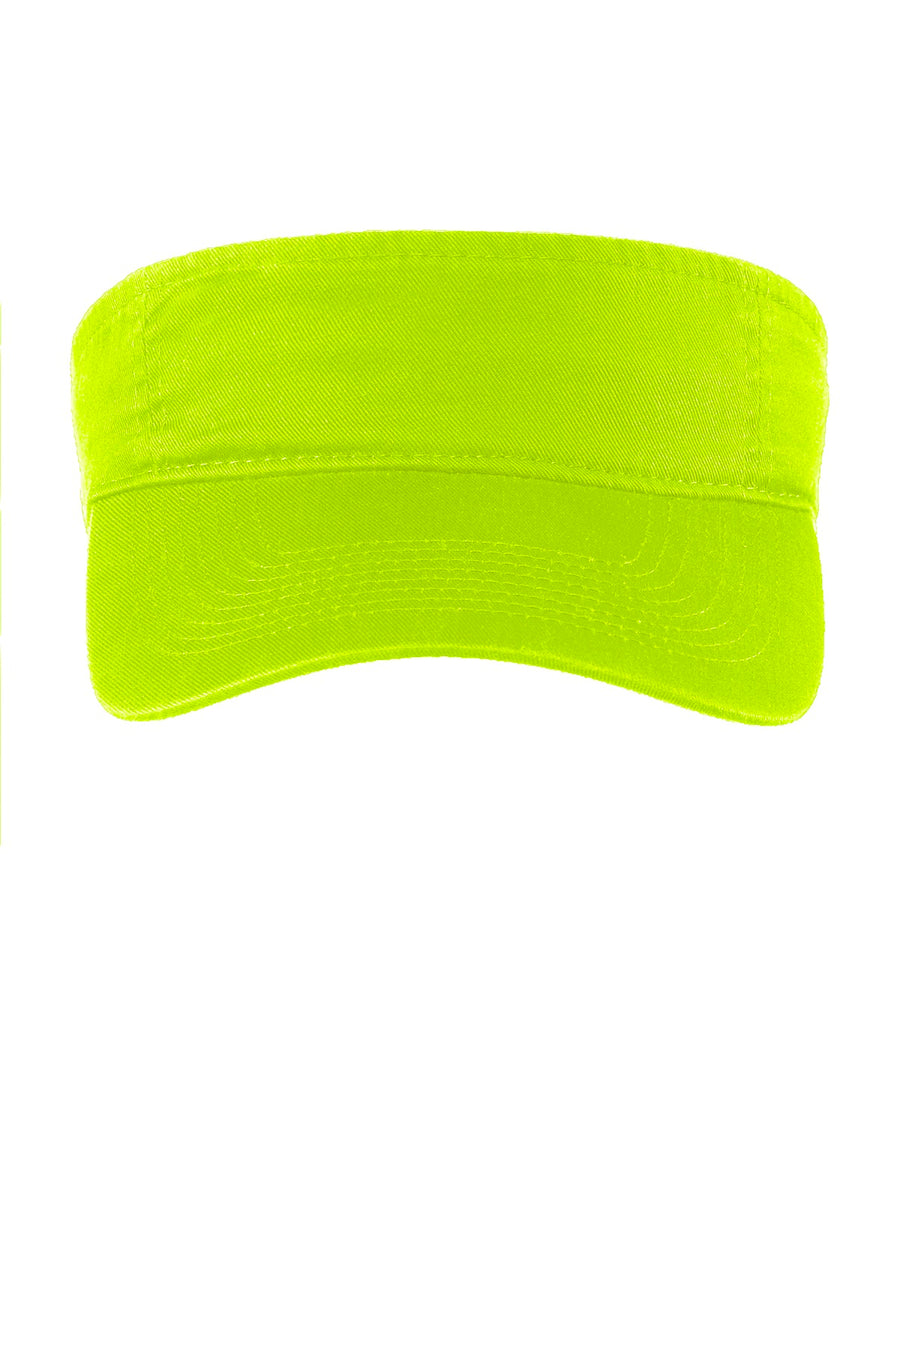 CP45-Neon Yellow-front_flat